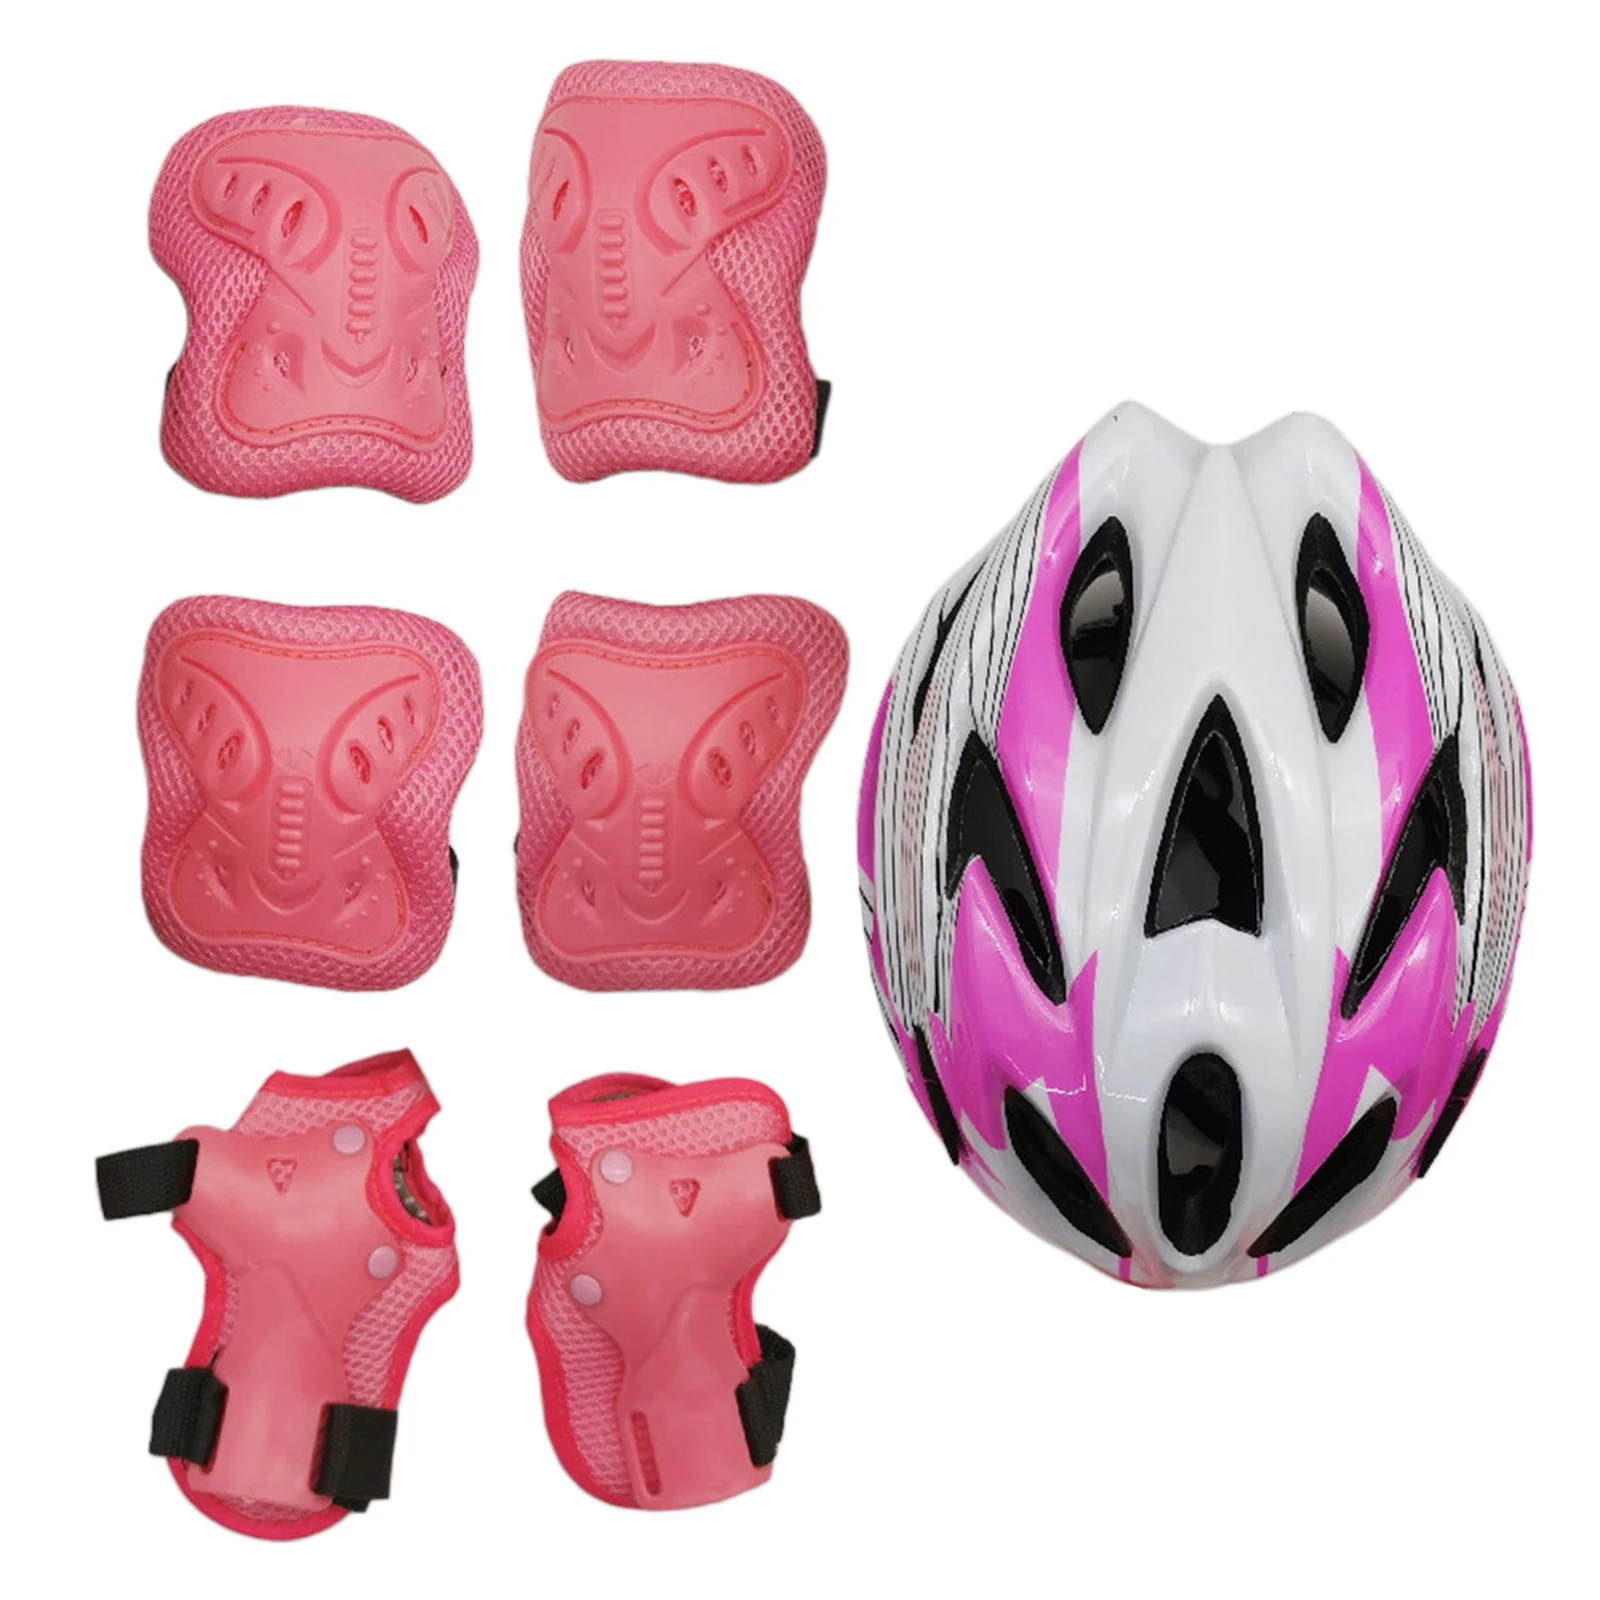 7pcs Kids Teenagers Knee Pads Elbow Pads Guards Protection Sports Safety Skating Skateboard Cycling Knee Protector